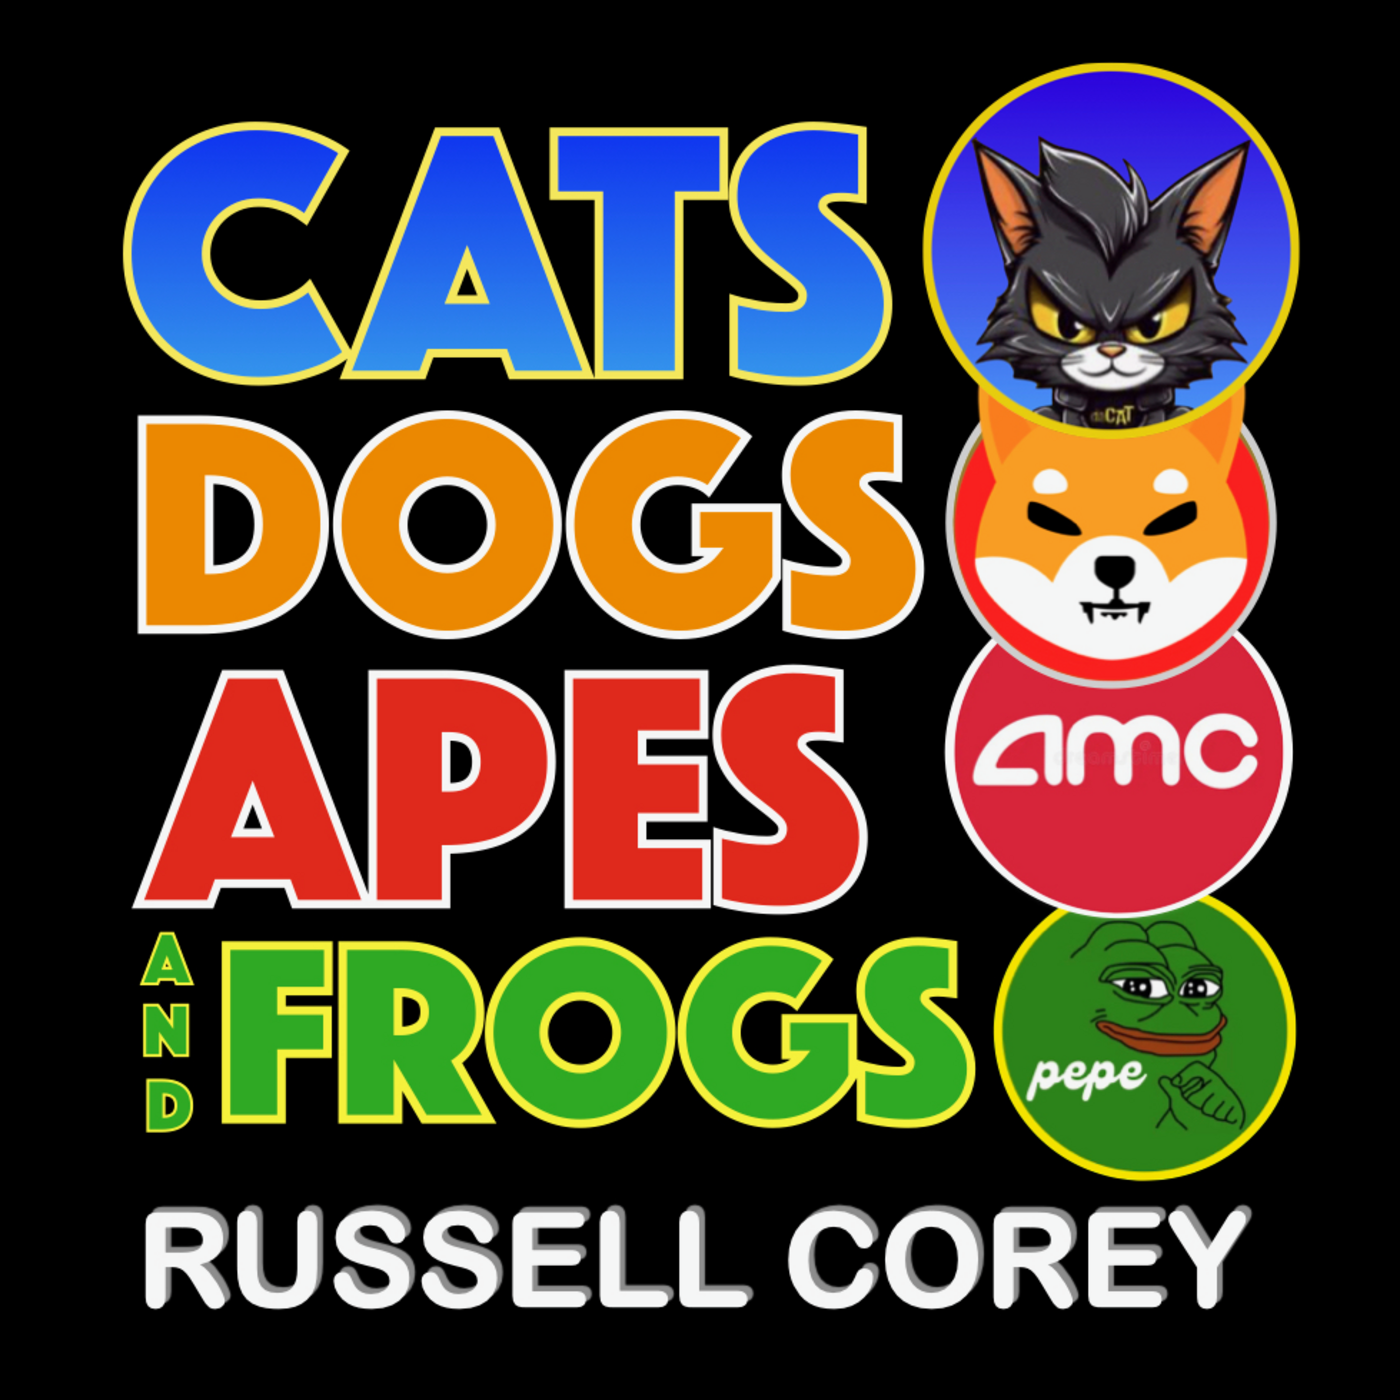 CATS DOGS APES AND FROGS - Crypto and AMC Investing Podcast by Russell Corey